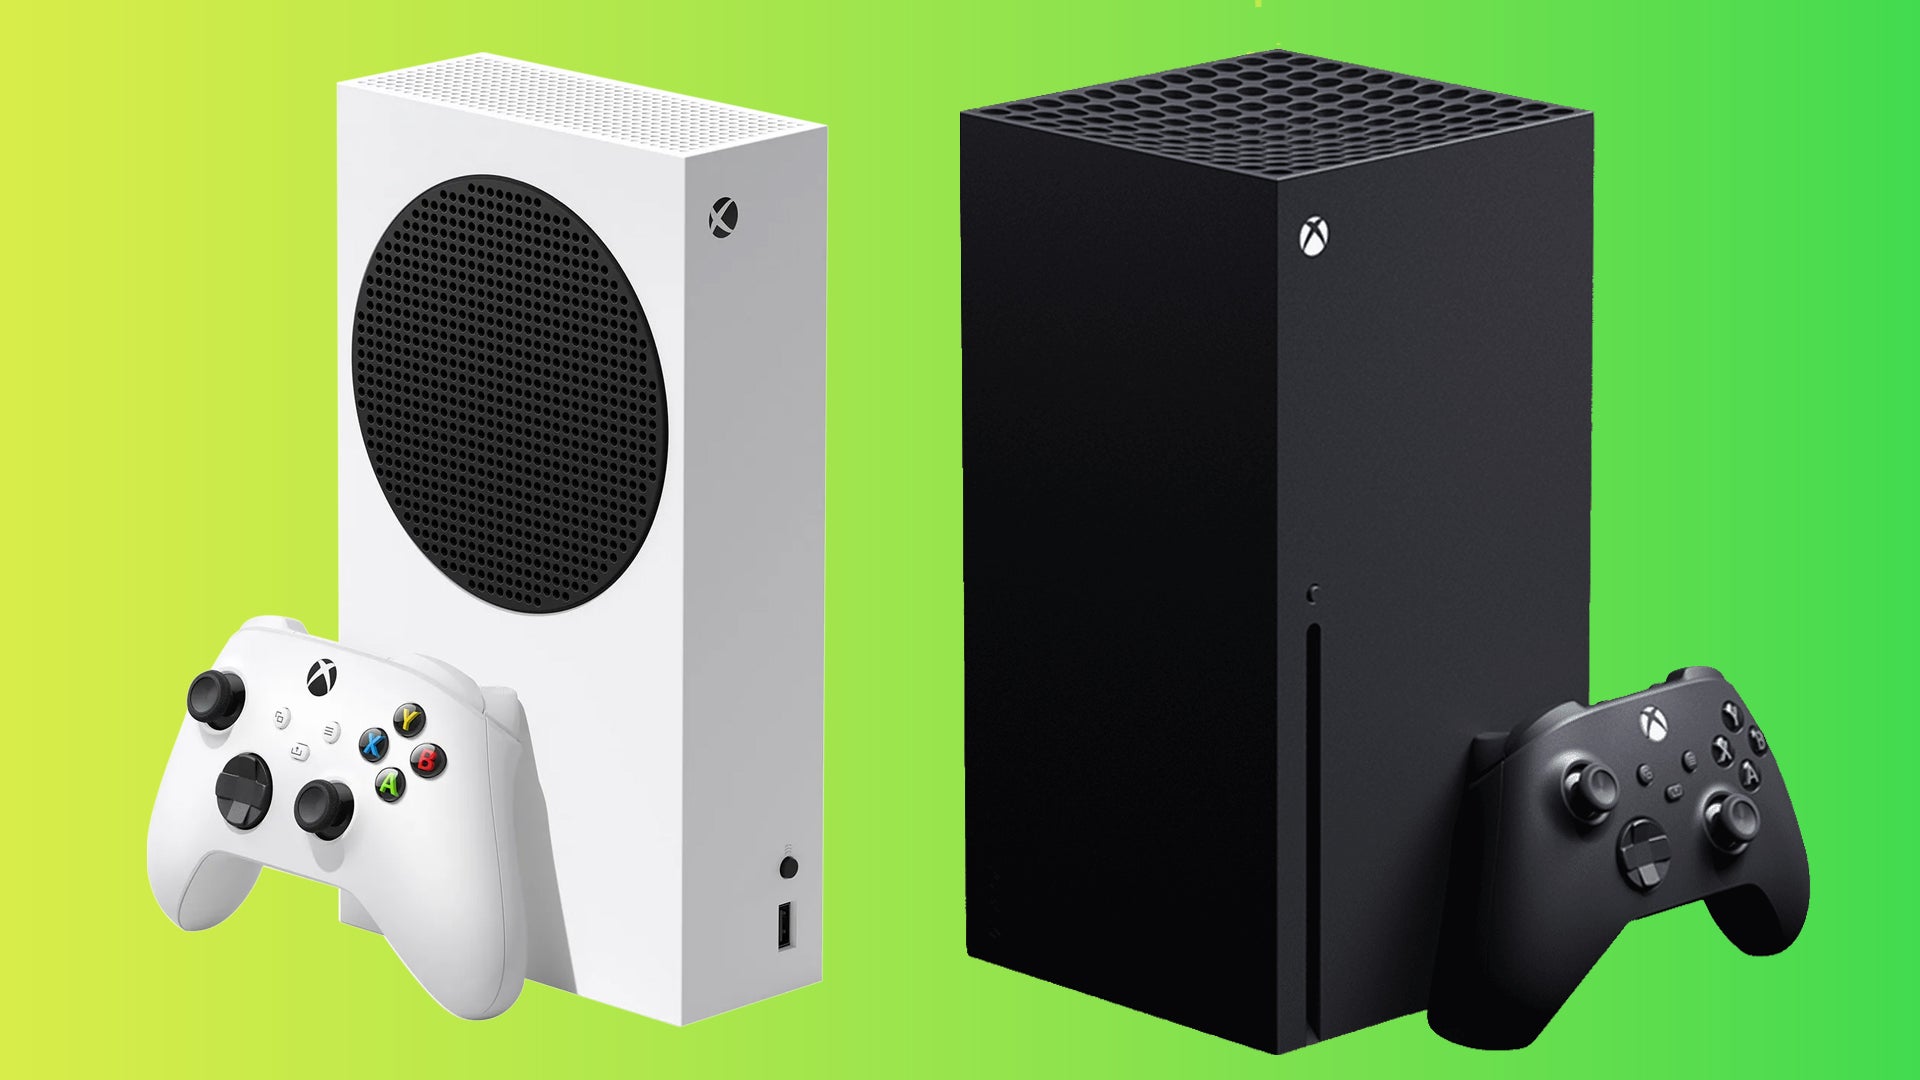 Get a refurbished Xbox Series X or S from Microsoft for less with this 